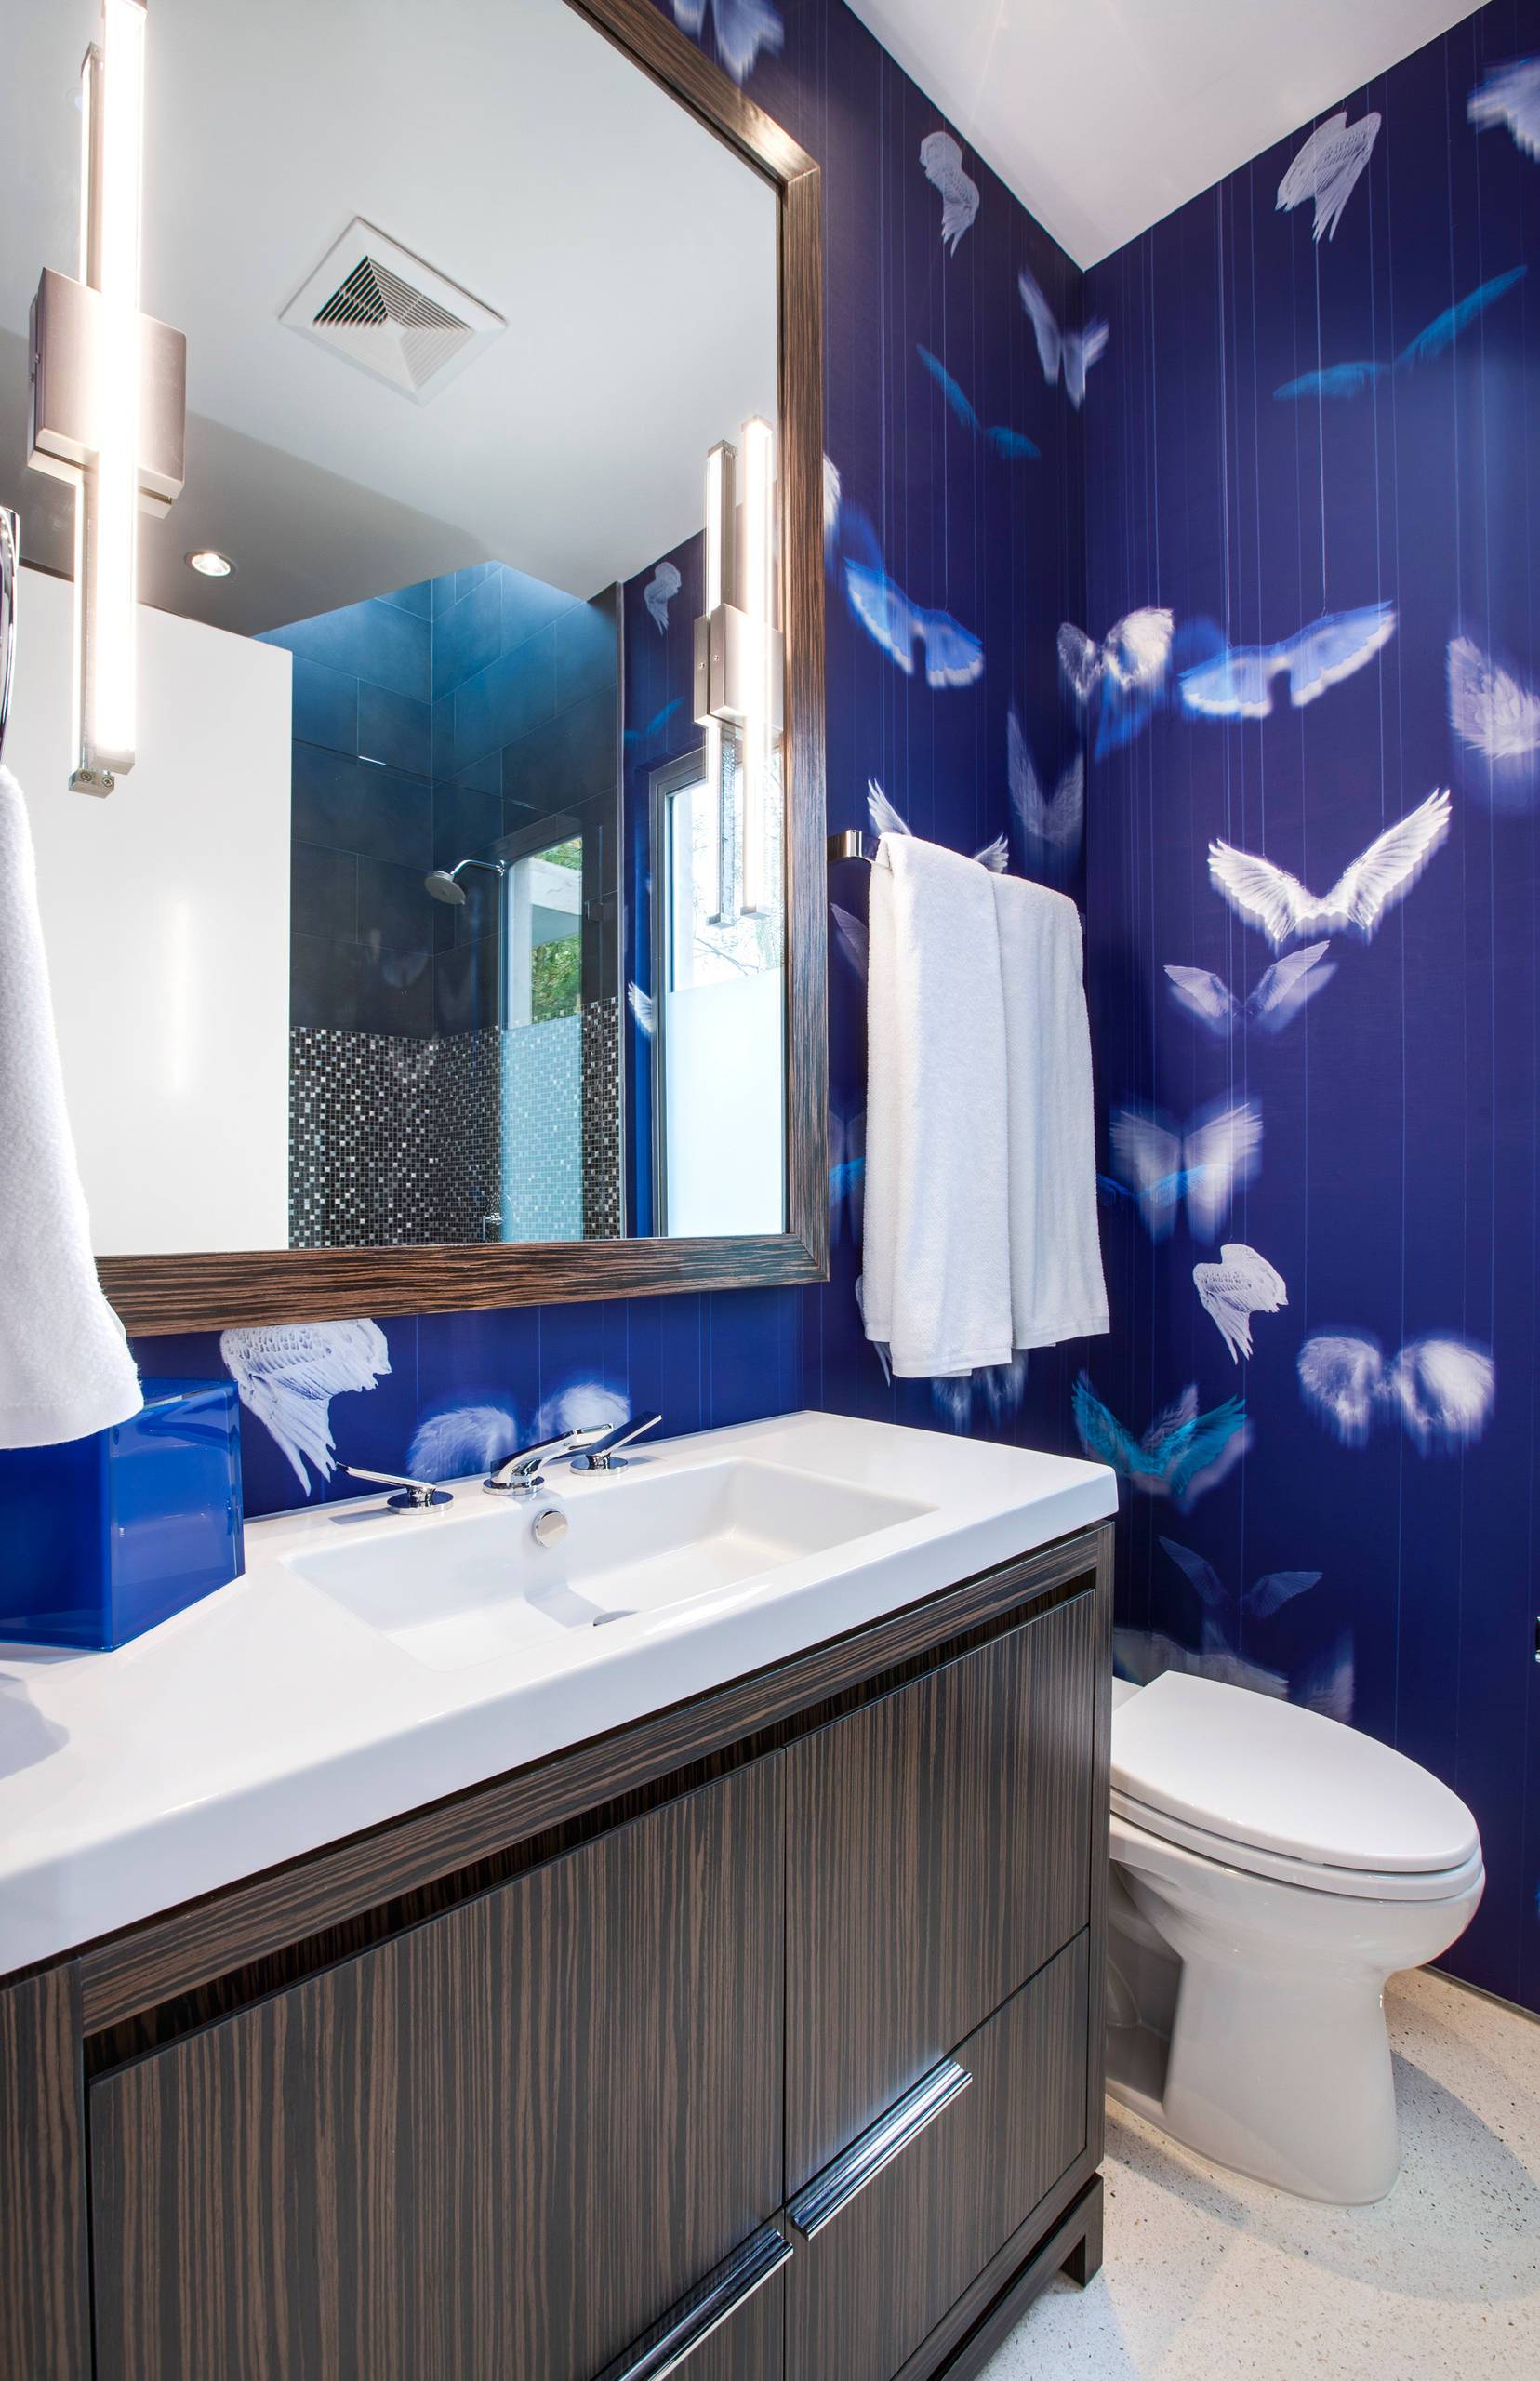 Energetic deep blue wallpaper with nature-centric motif steals the spotlight in here